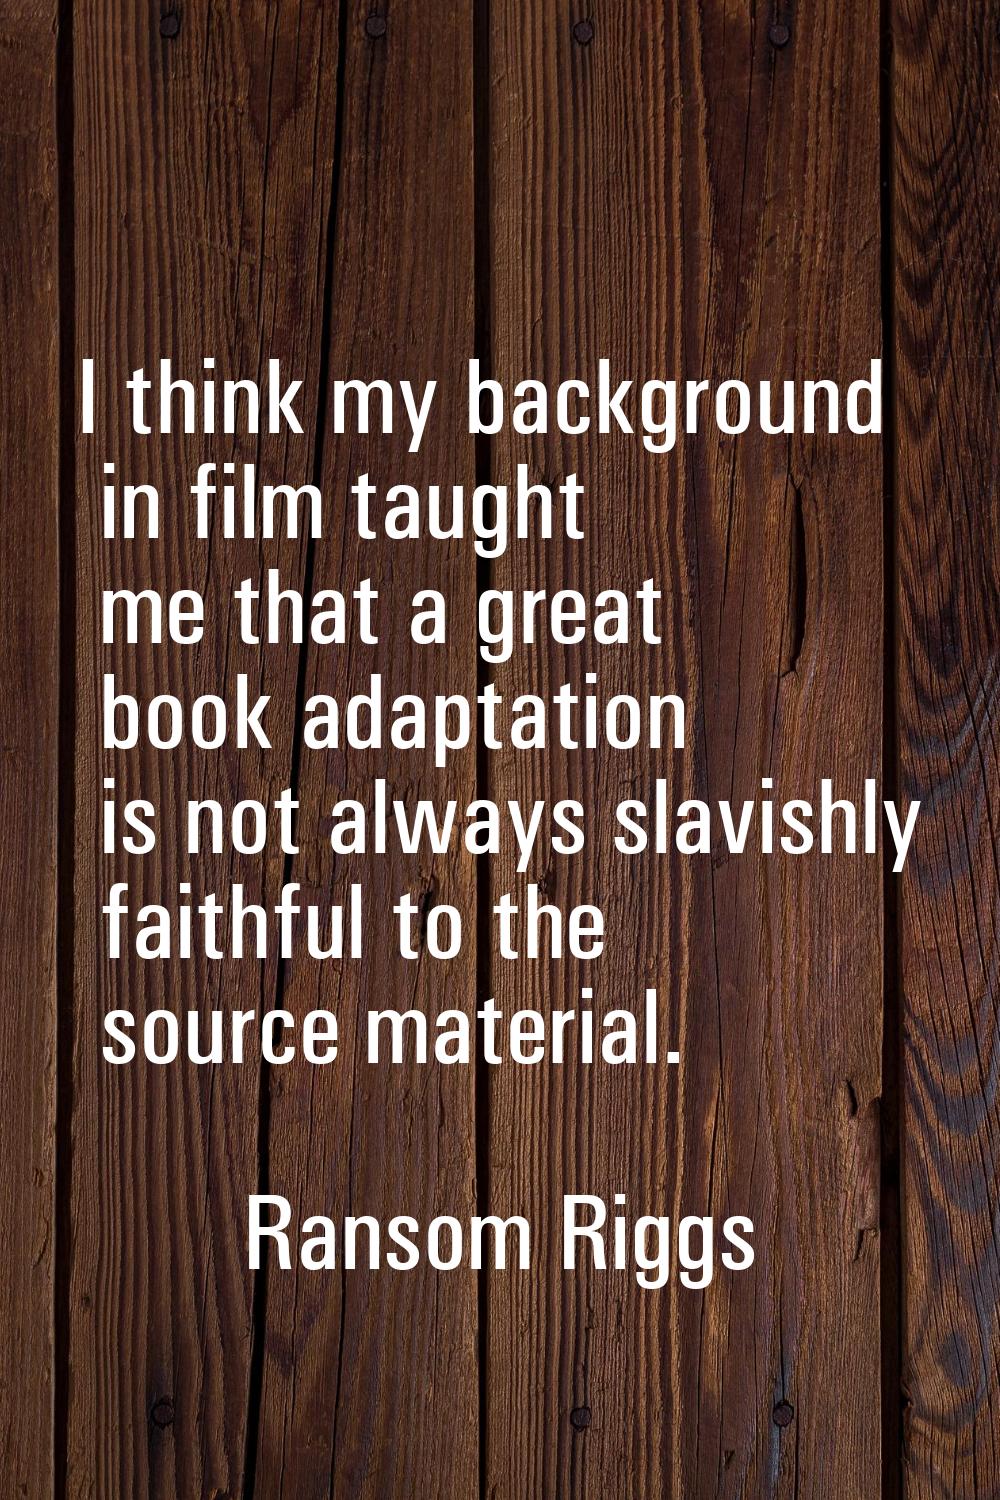 I think my background in film taught me that a great book adaptation is not always slavishly faithf